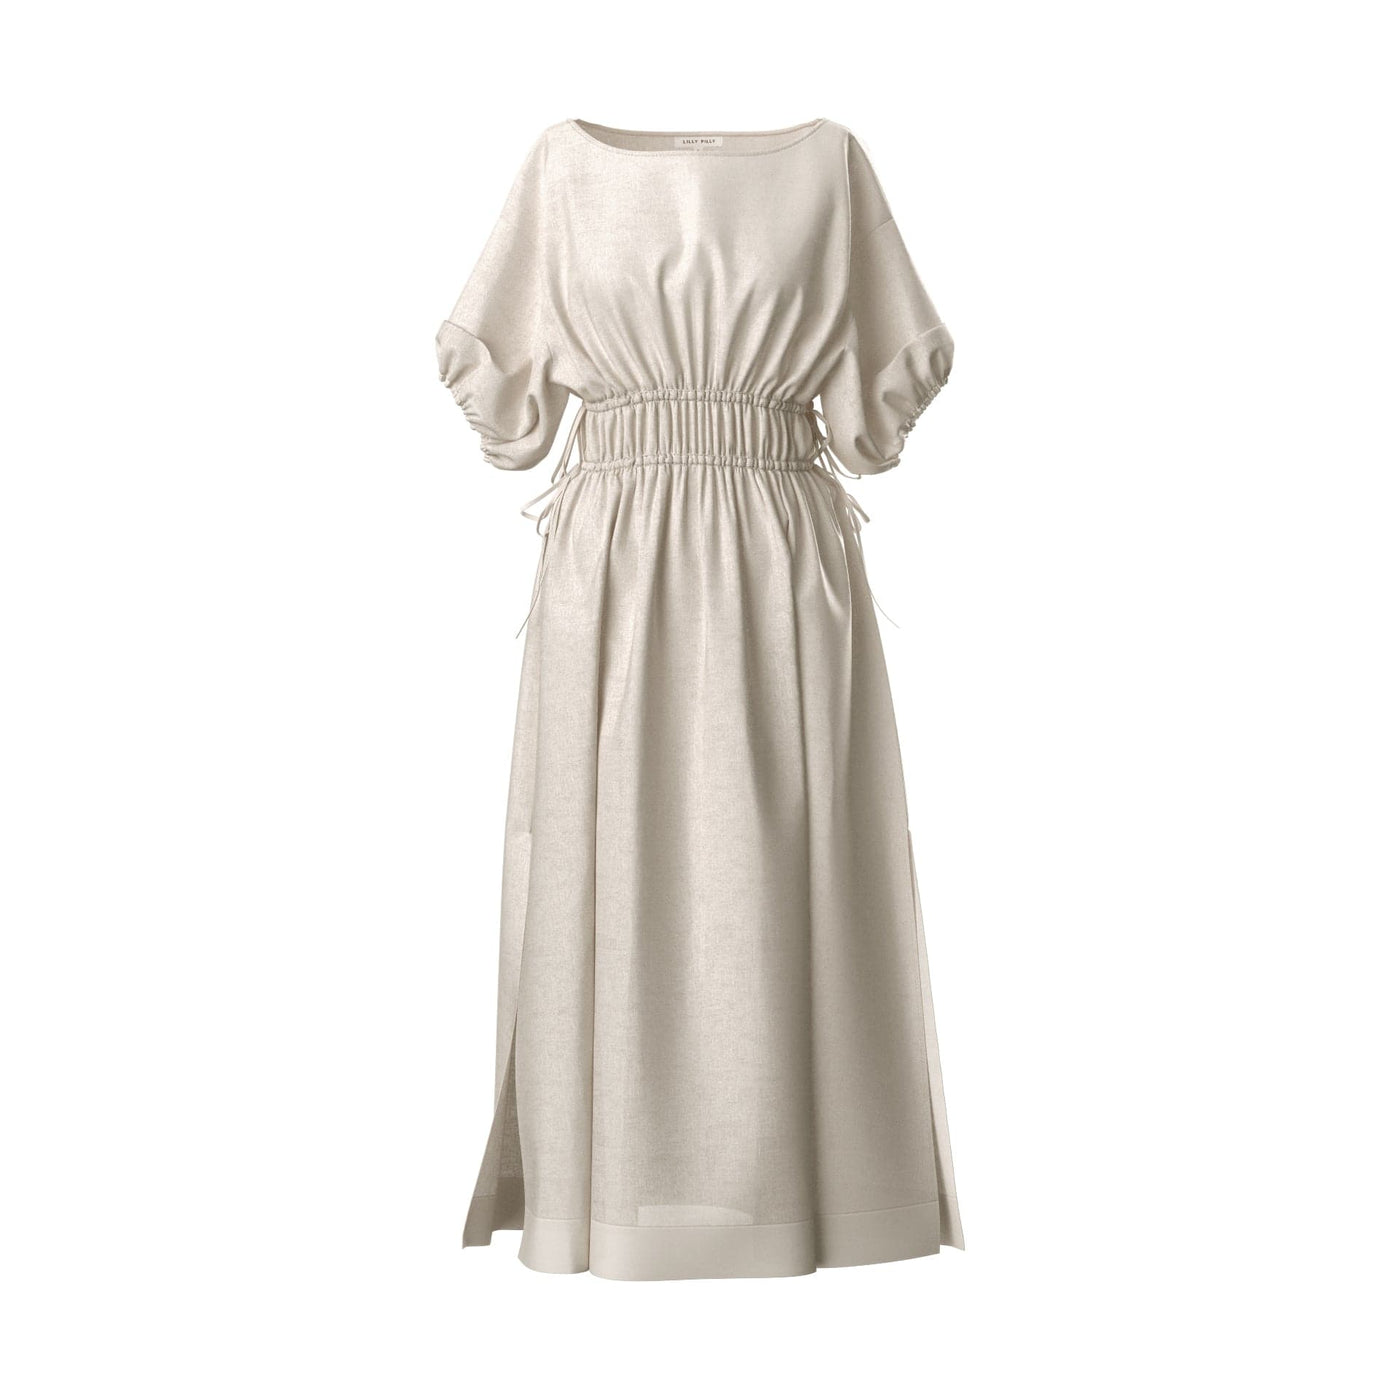 Lilly Pilly Collection Valerie dress made from 100% Organic linen in Ivory, as 3D model showing front view